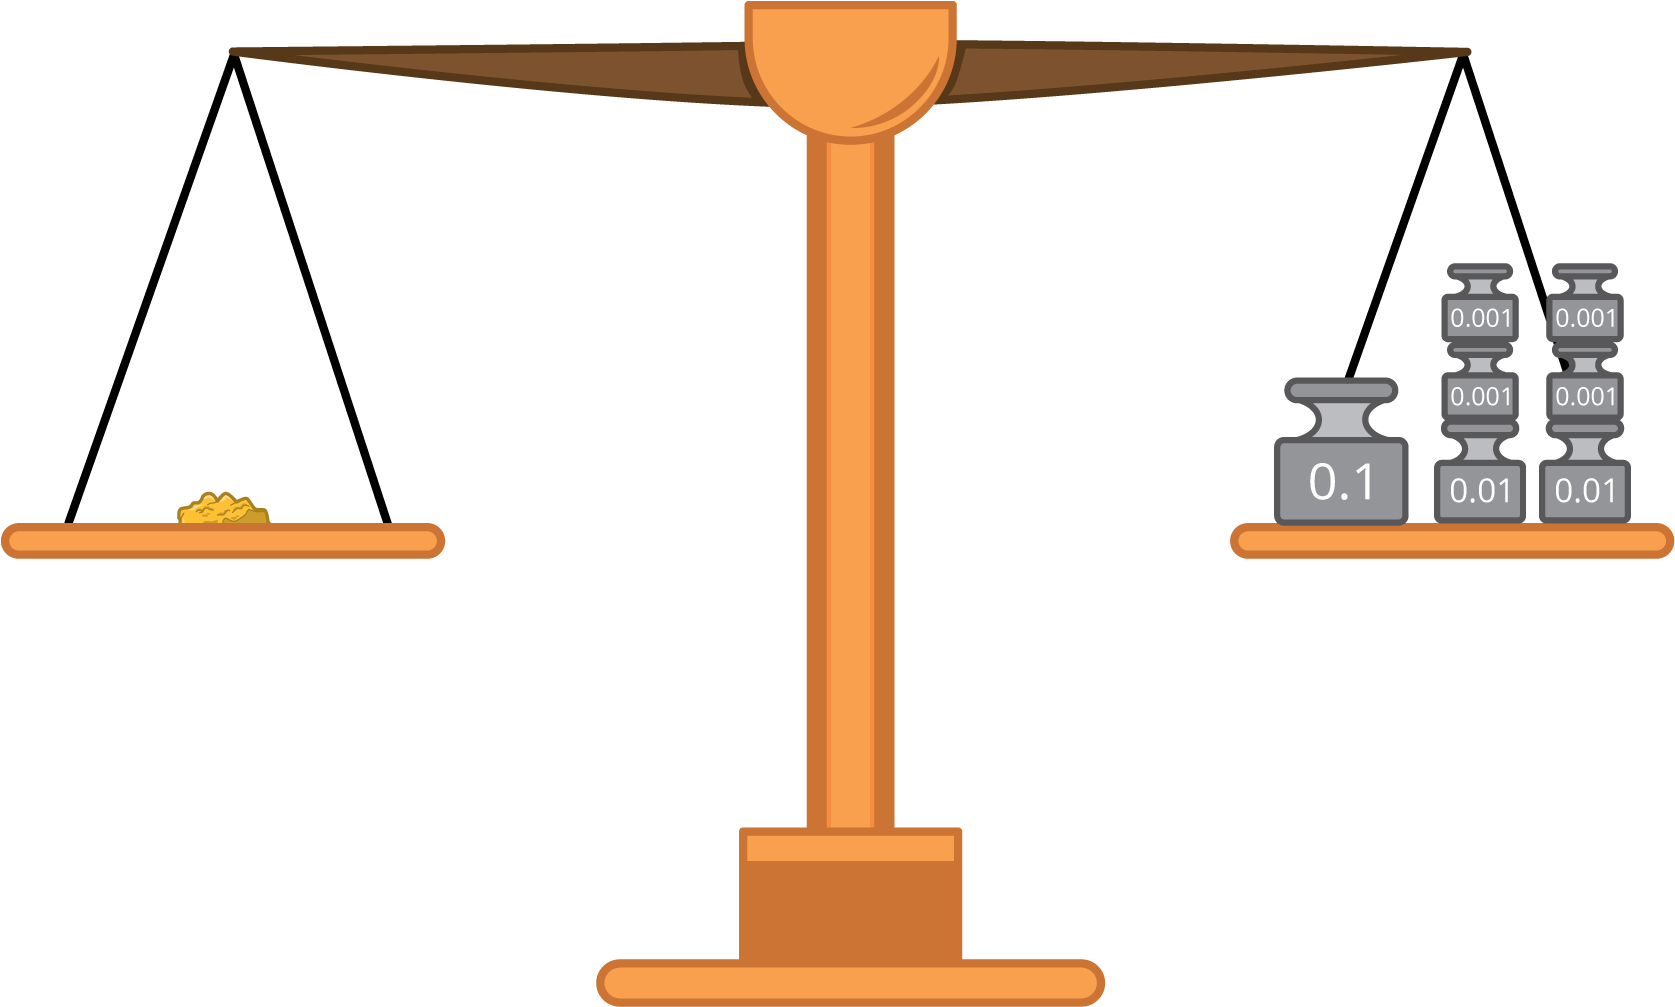 Balance scale. Left side, gold nuggets. Right side, 1 tenth weight, 1. 1 hundredth weights, 2. 1 thousandths weights, 4. 